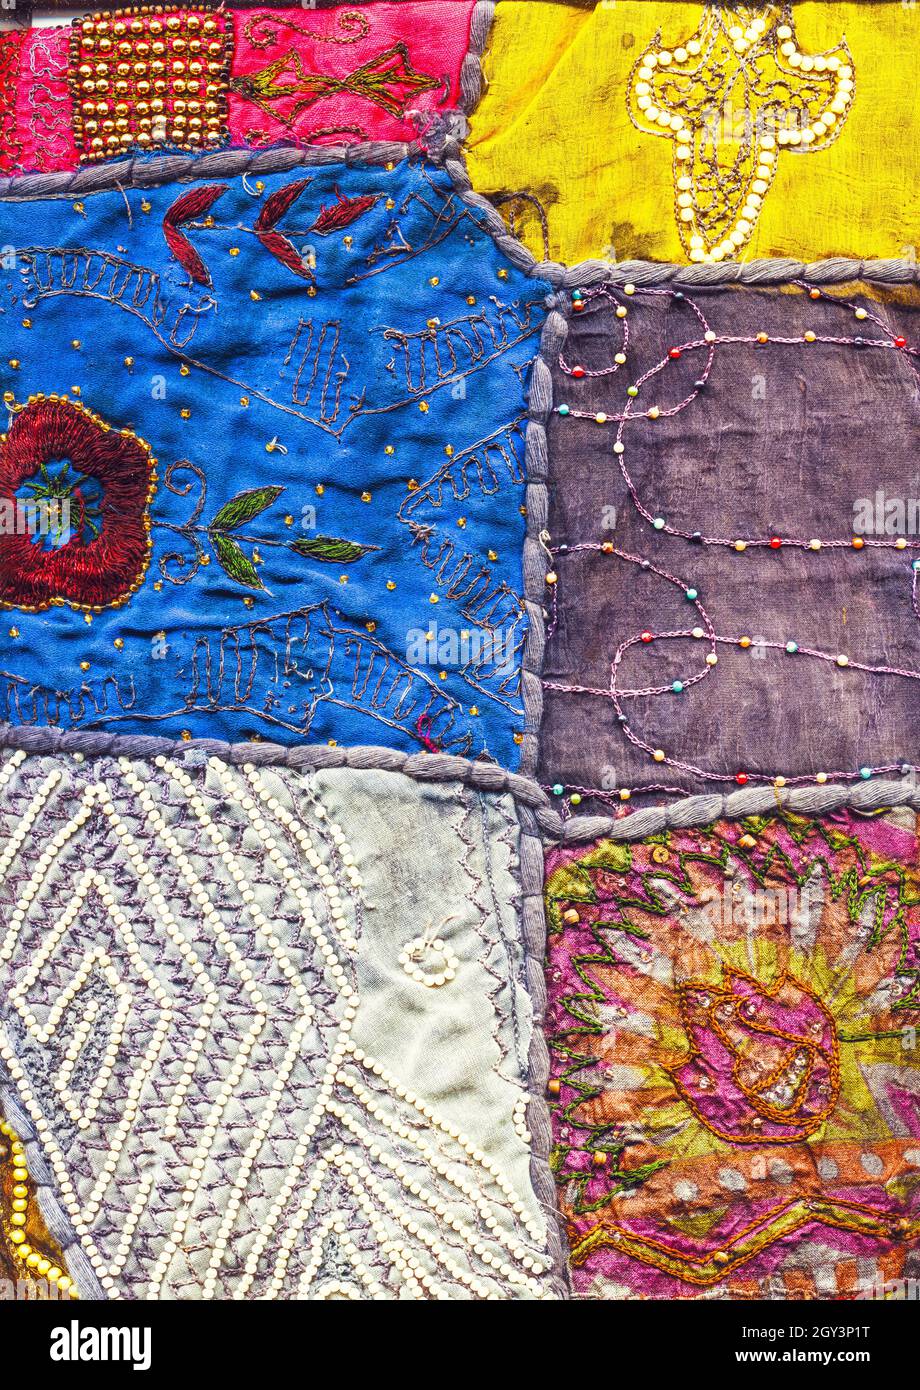 close up of indian sari very ornate and colorful Stock Photo